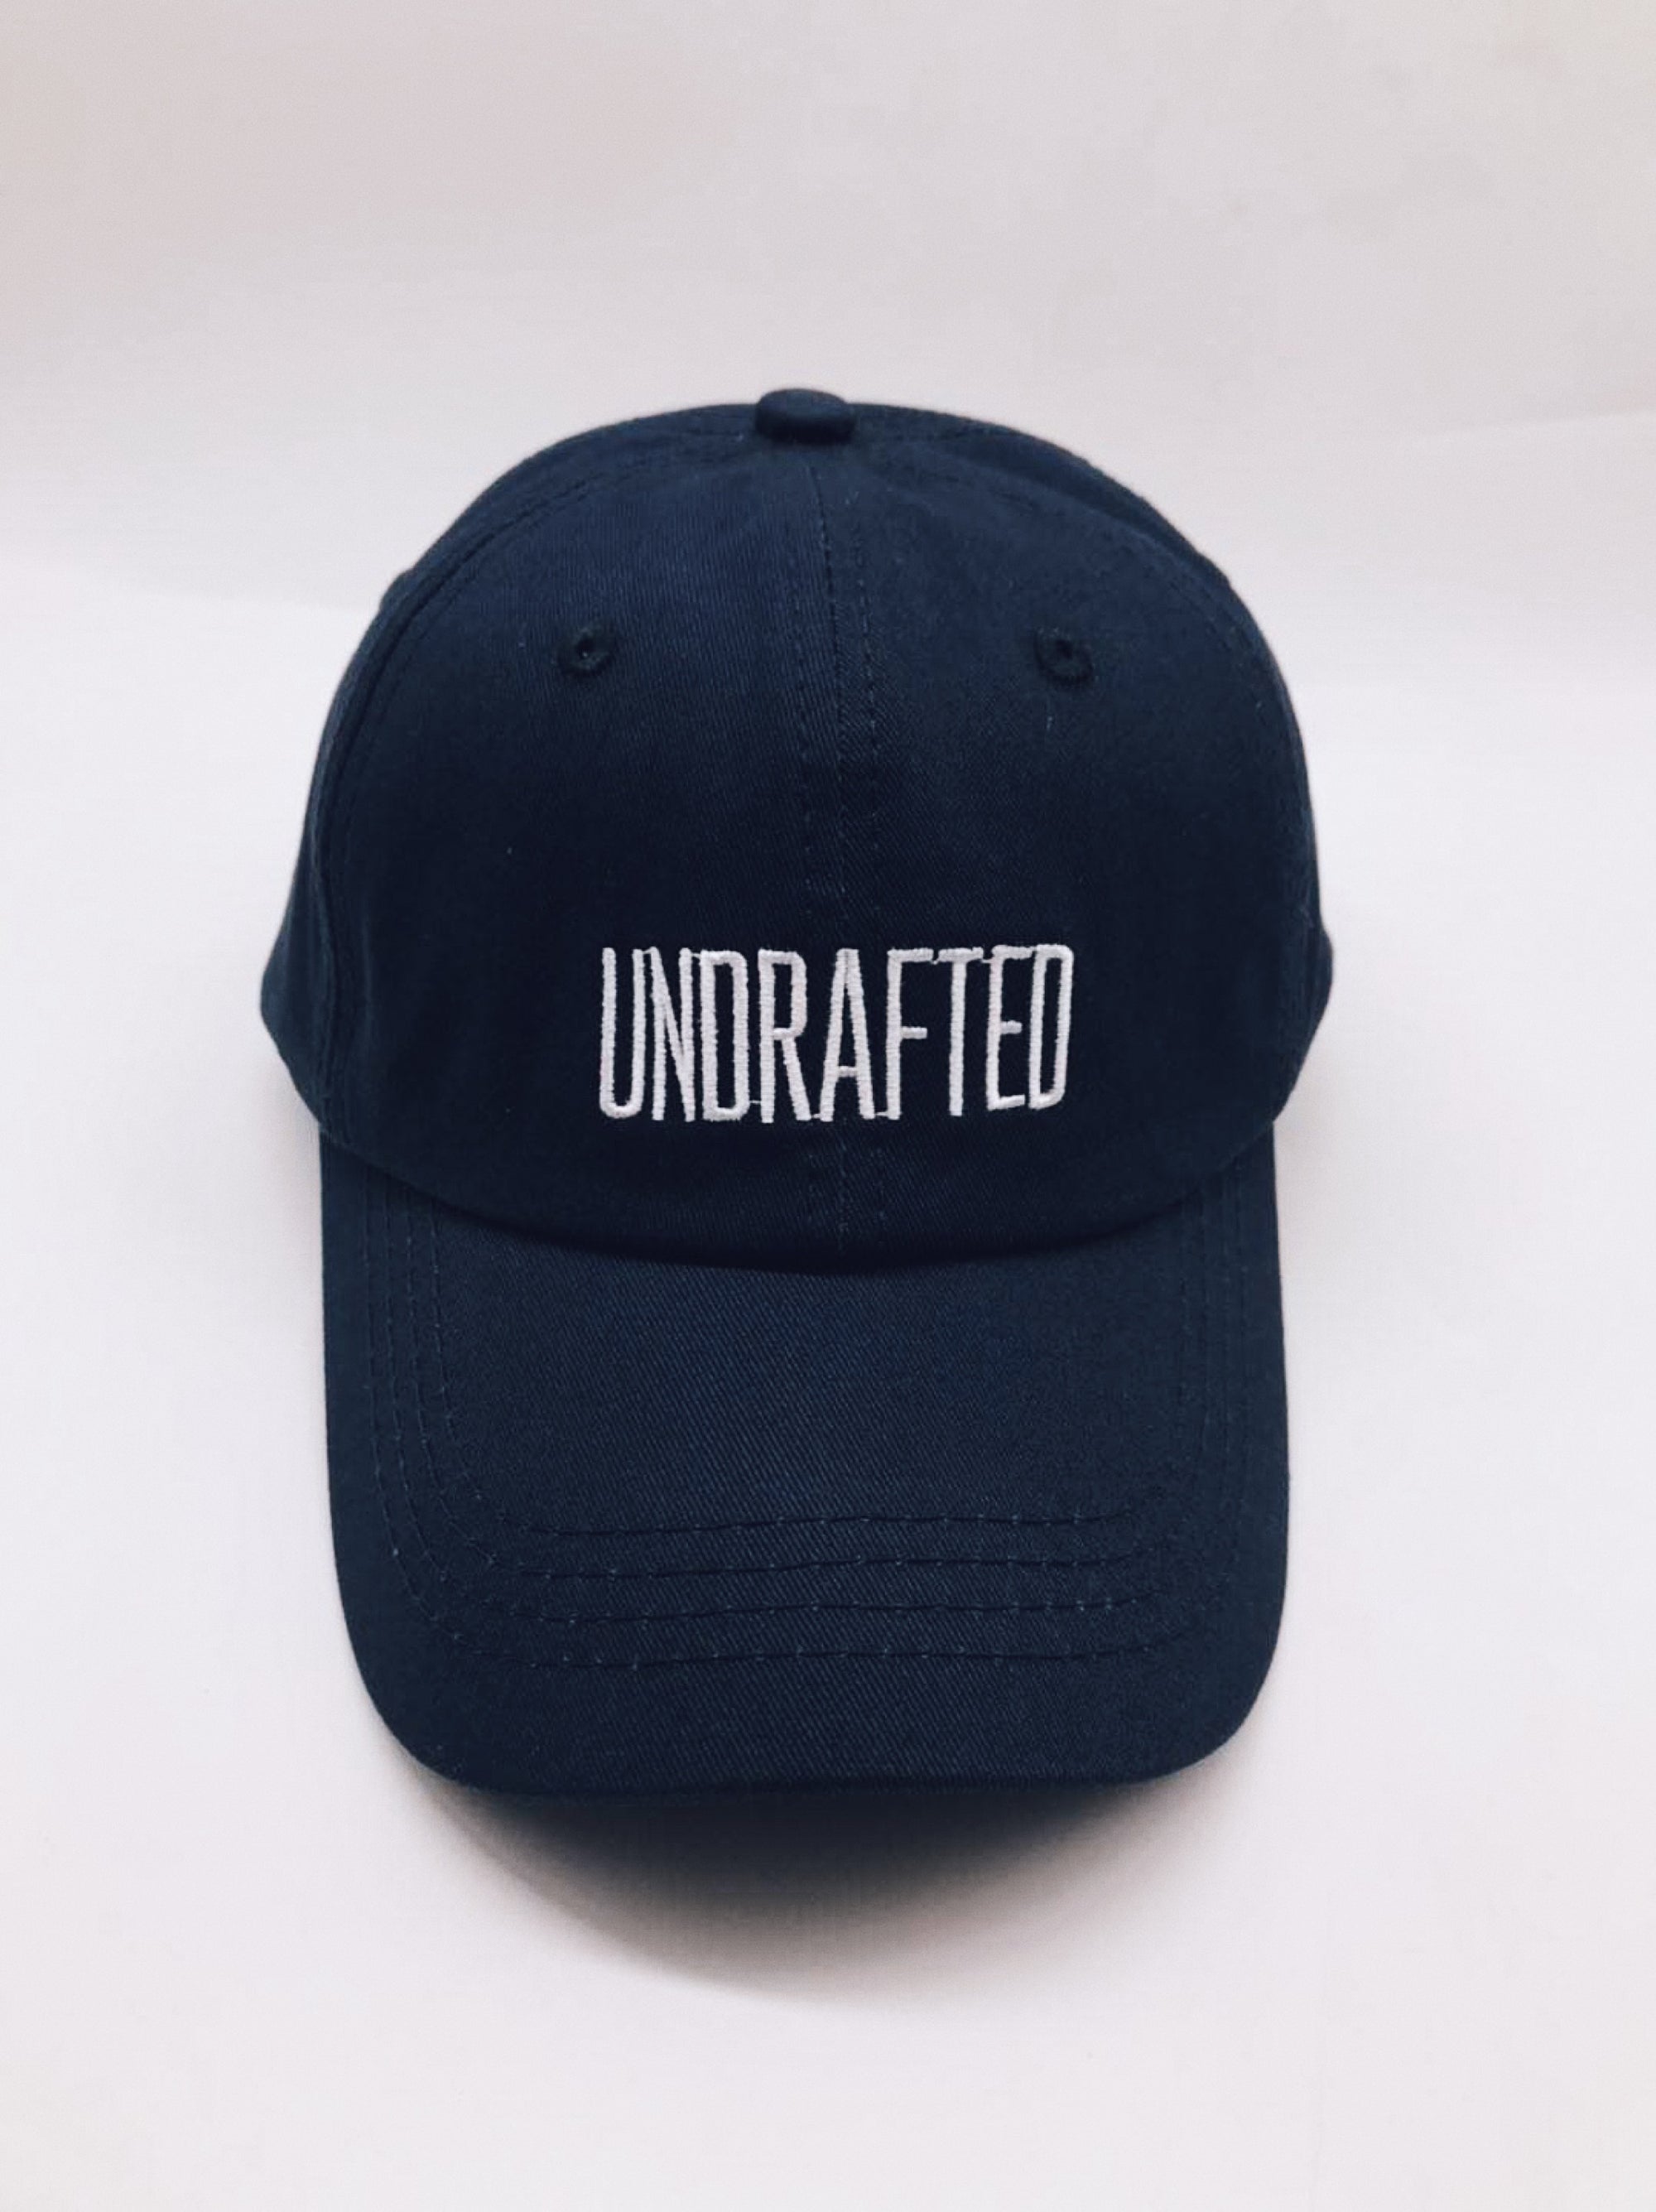 Undrafted Dad Hat - Navy Blue/White